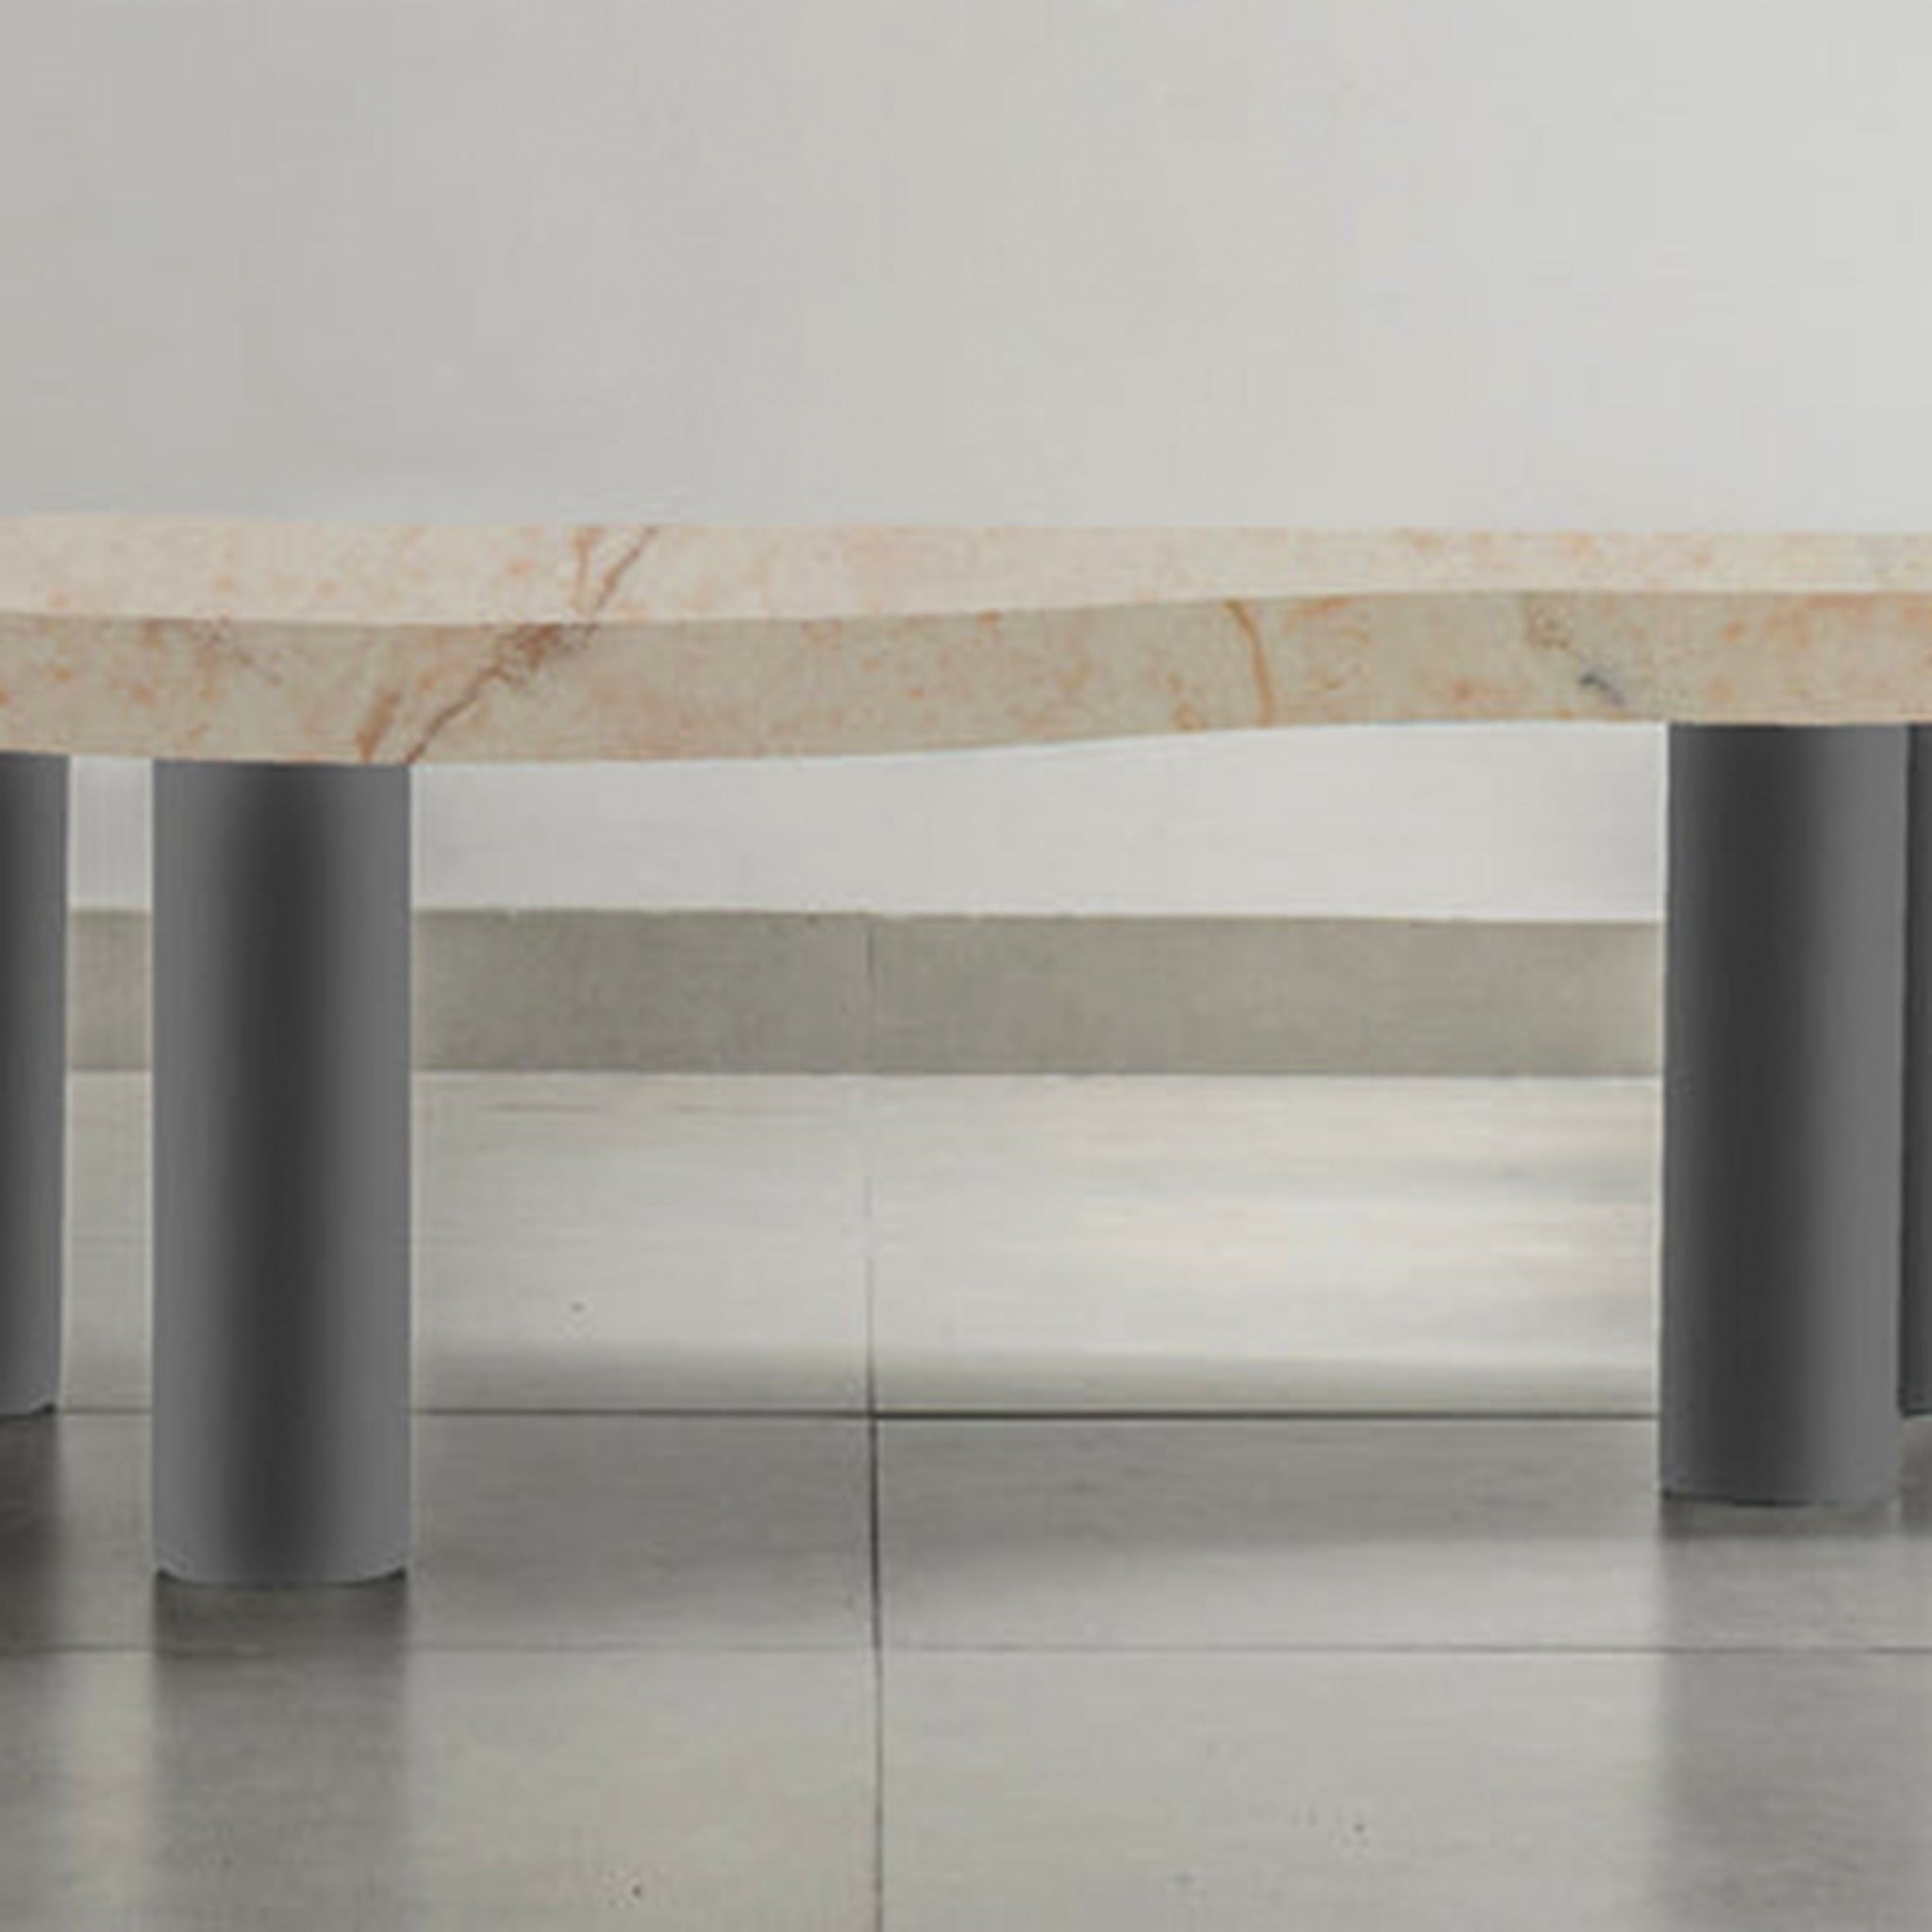 Statement Coffee Table: Bold, 4cm edge makes the Peggy table a centerpiece.